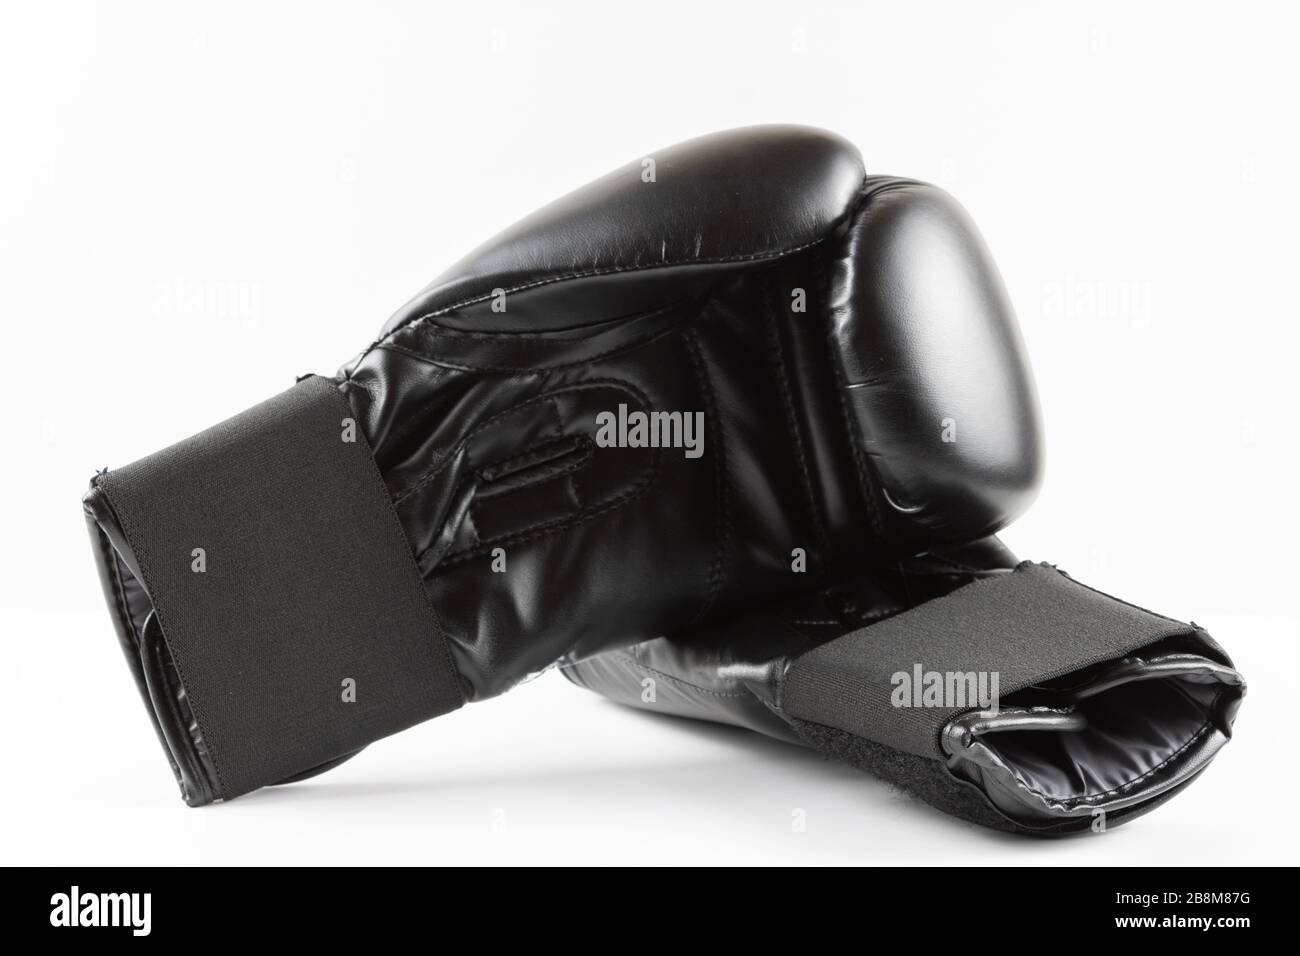 Black insulated white boxing gloves. sports product photography Stock Photo